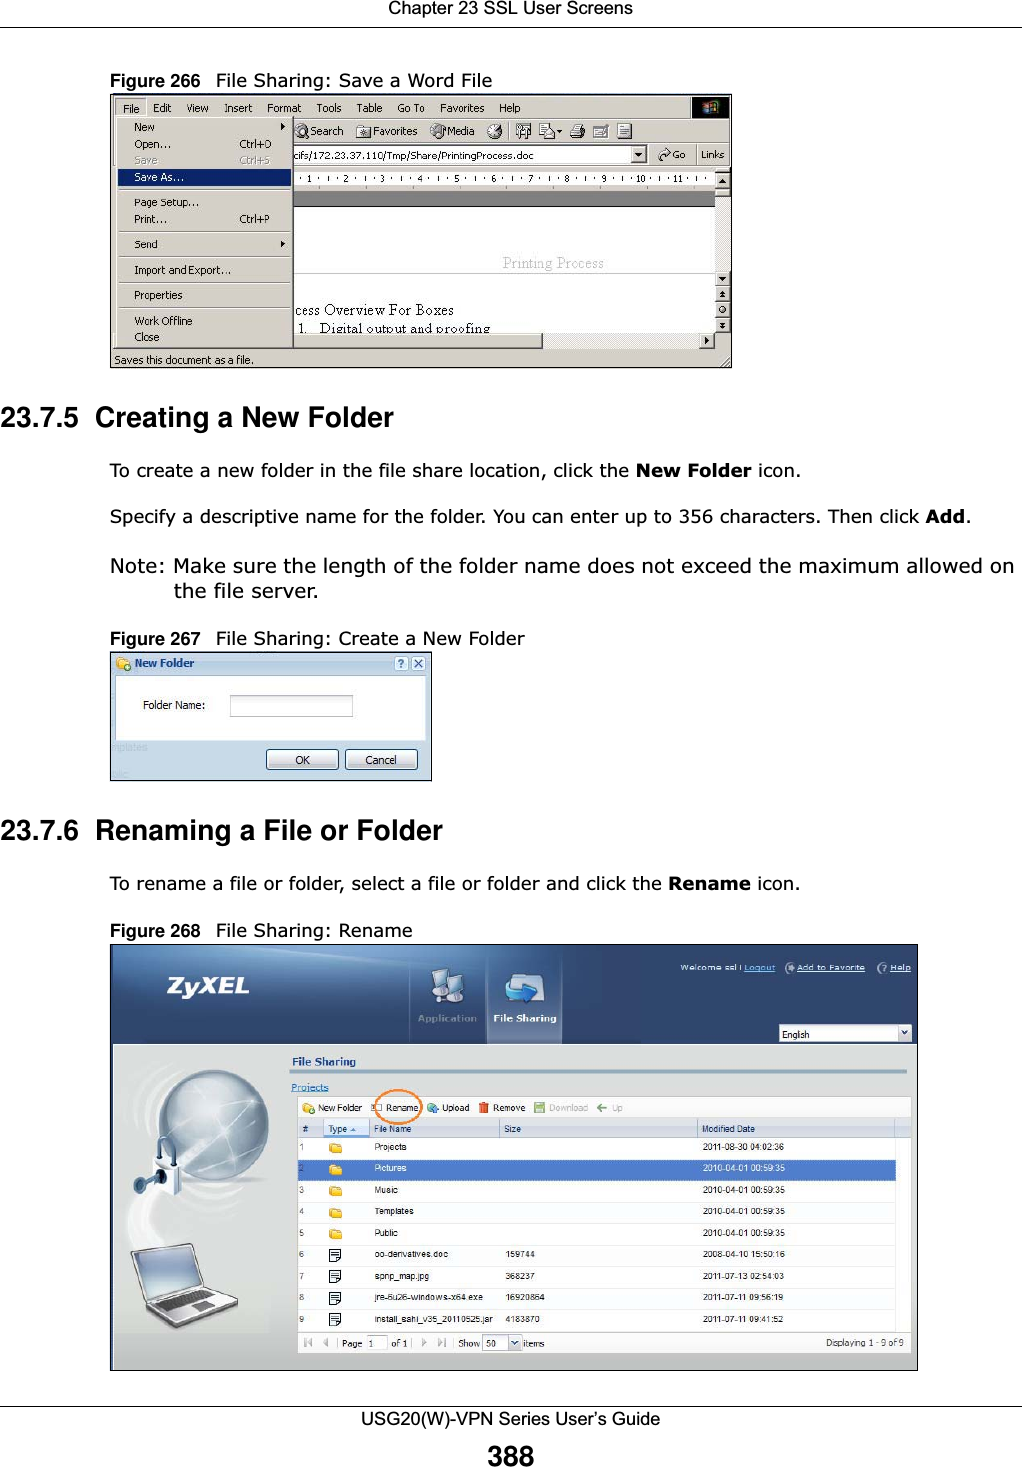 Chapter 23 SSL User ScreensUSG20(W)-VPN Series User’s Guide388Figure 266   File Sharing: Save a Word File  23.7.5  Creating a New FolderTo create a new folder in the file share location, click the New Folder icon. Specify a descriptive name for the folder. You can enter up to 356 characters. Then click Add.Note: Make sure the length of the folder name does not exceed the maximum allowed on the file server. Figure 267   File Sharing: Create a New Folder  23.7.6  Renaming a File or FolderTo rename a file or folder, select a file or folder and click the Rename icon. Figure 268   File Sharing: Rename 